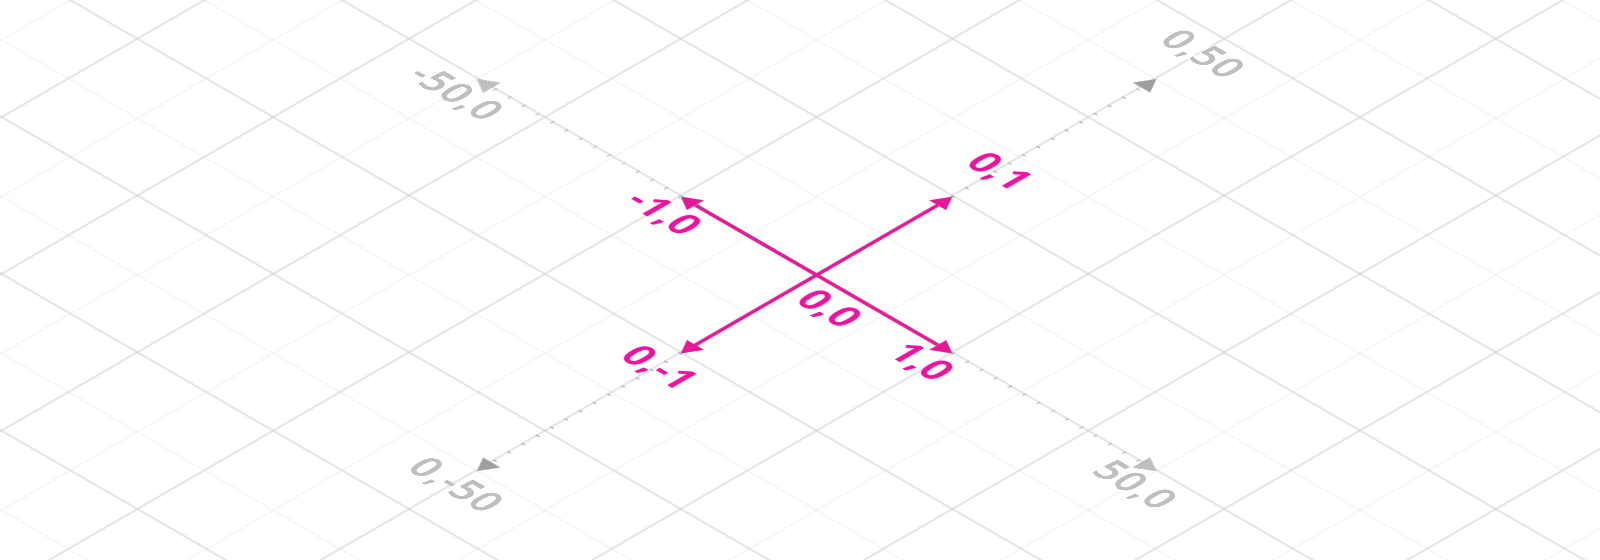 Arcentry uses a cartesian coordinate system